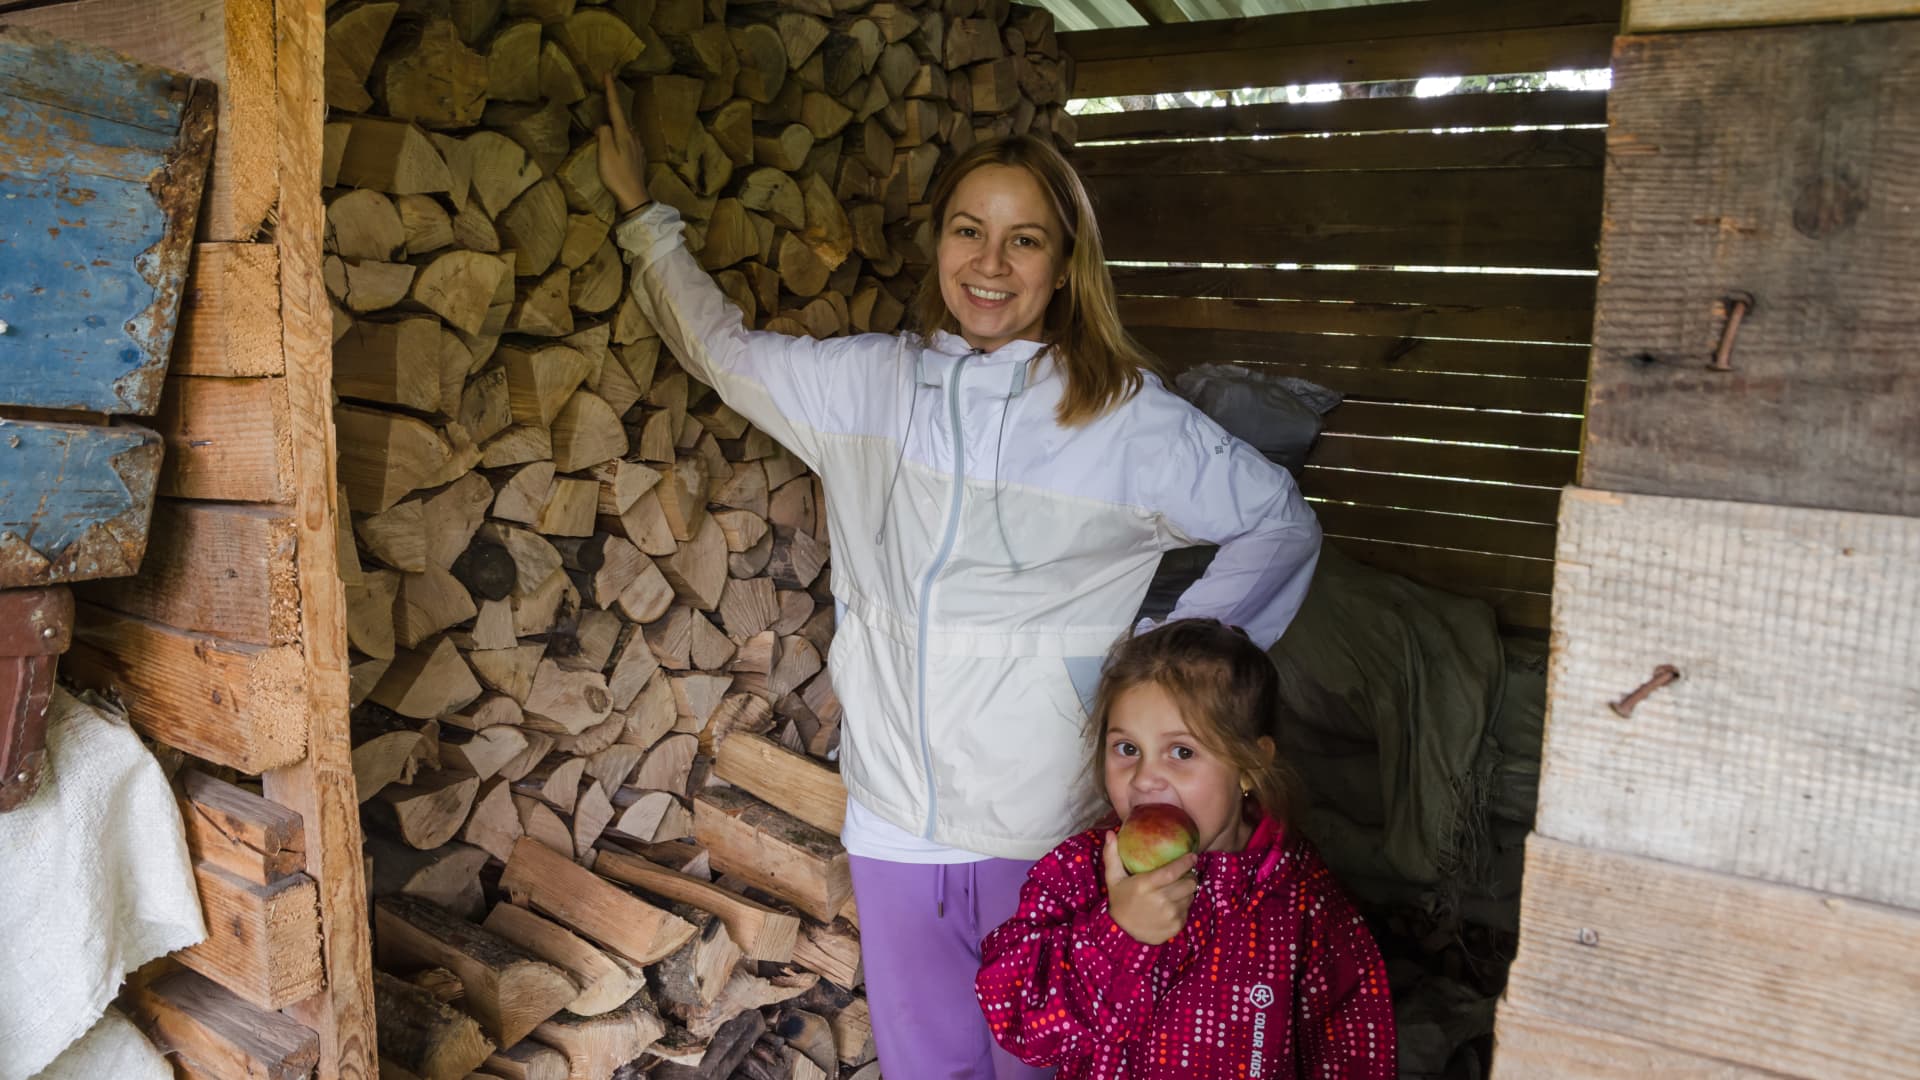 Ukrainians are preparing for the cold winter and stocking up on firewood in Lviv, Ukraine on September 11, 2022.